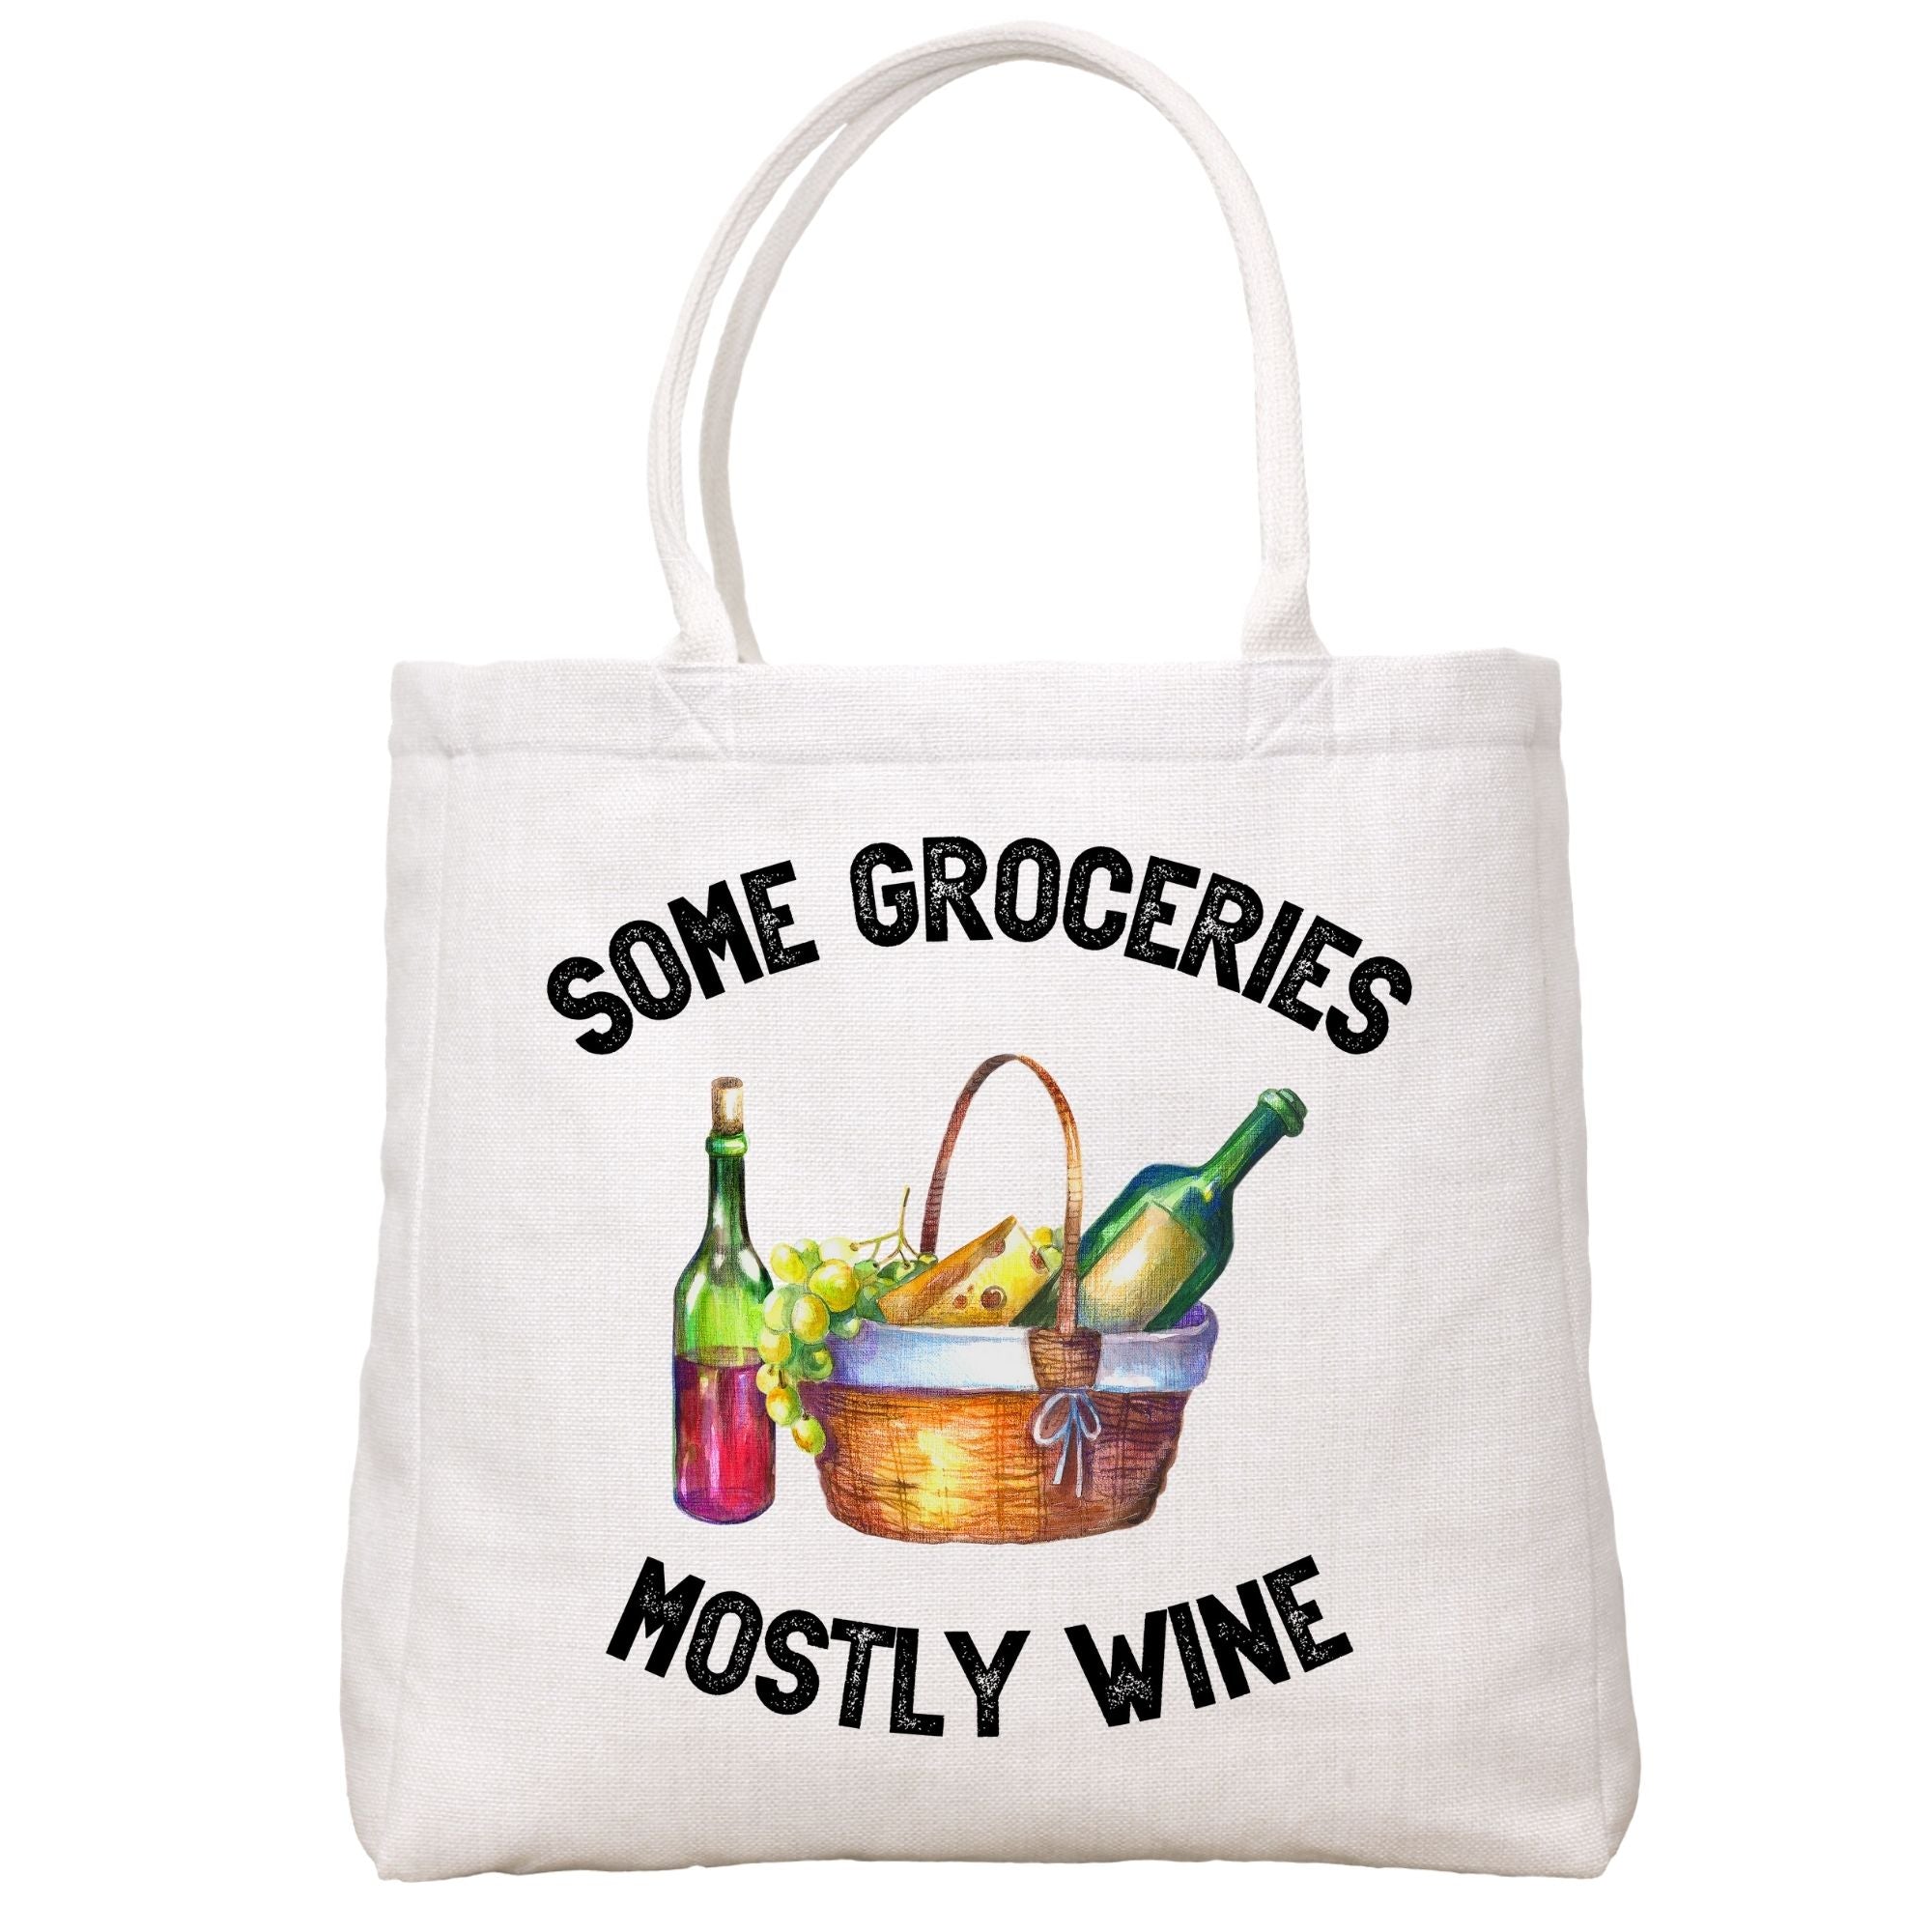 Mostly Wine Tote Bag Tote Bag - Southern Sisters